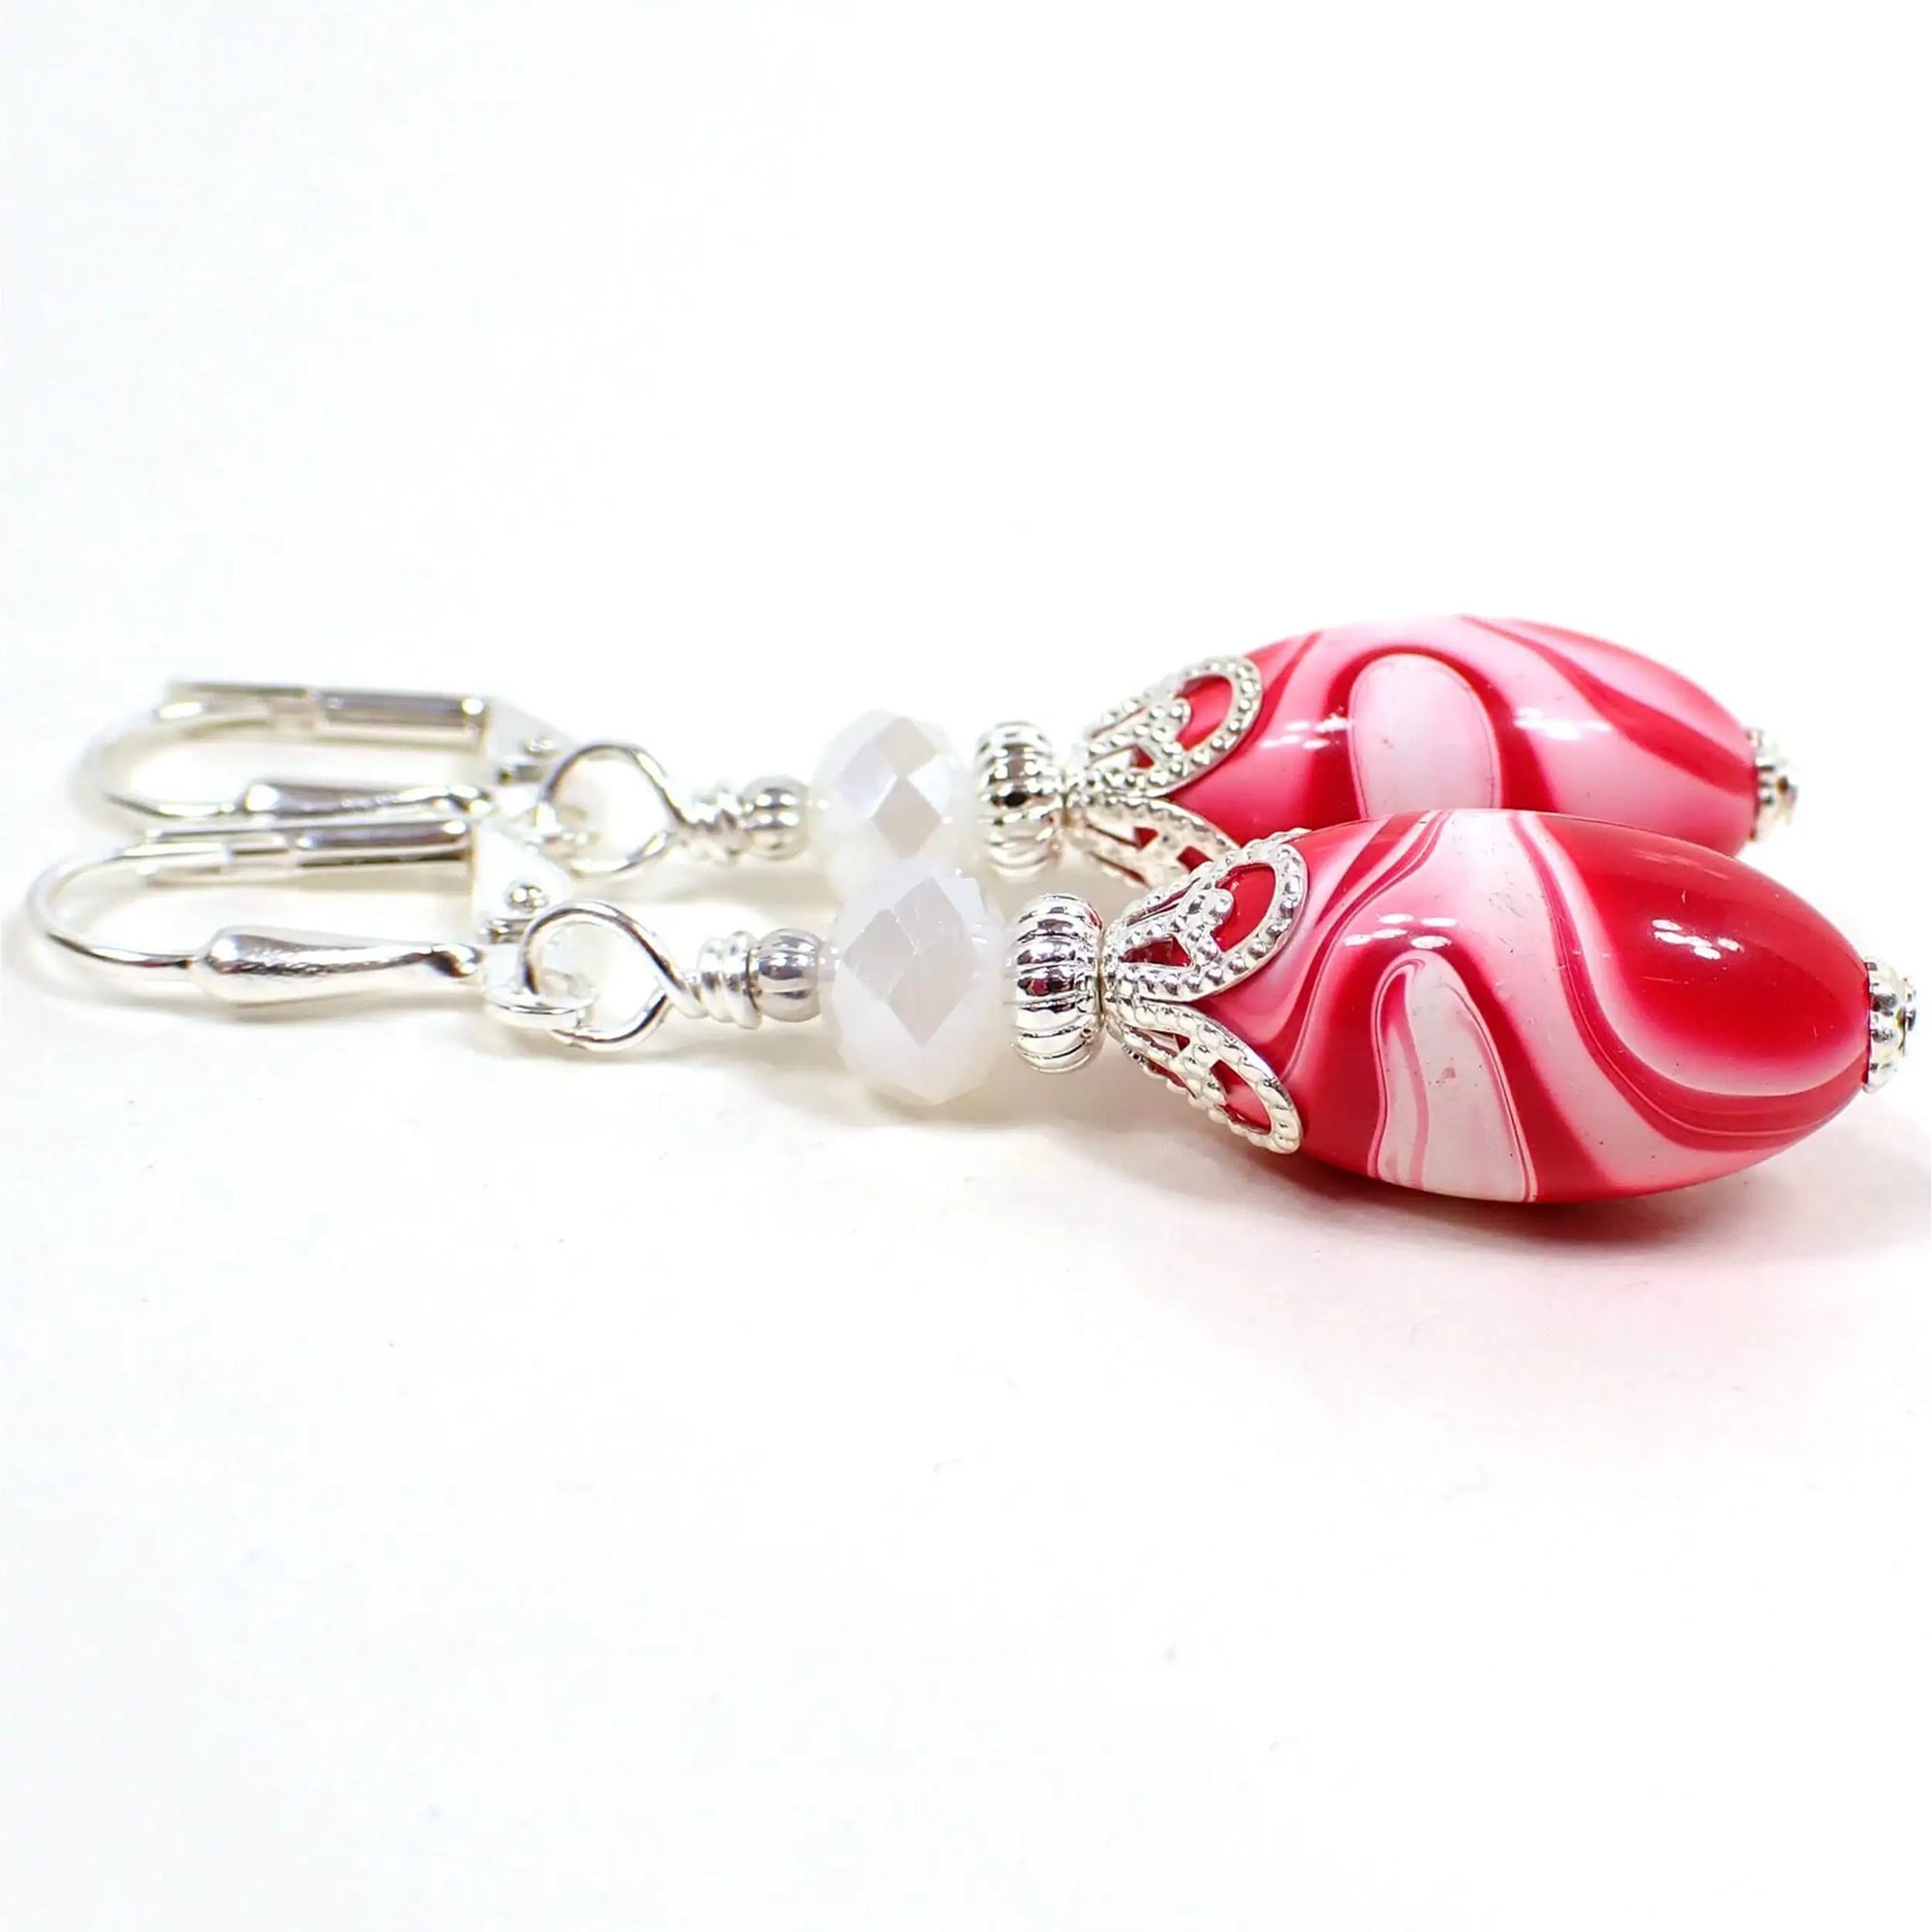 Angled view of the handmade earrings with vintage lucite beads. The metal is silver plated in color. There are faceted opaque pearly white glass beads at the top. The bottom lucite beads are oval shaped and have marbled swirls of red, pink, and white. Each bottom bead has a different pattern from the other for a unique appearance.